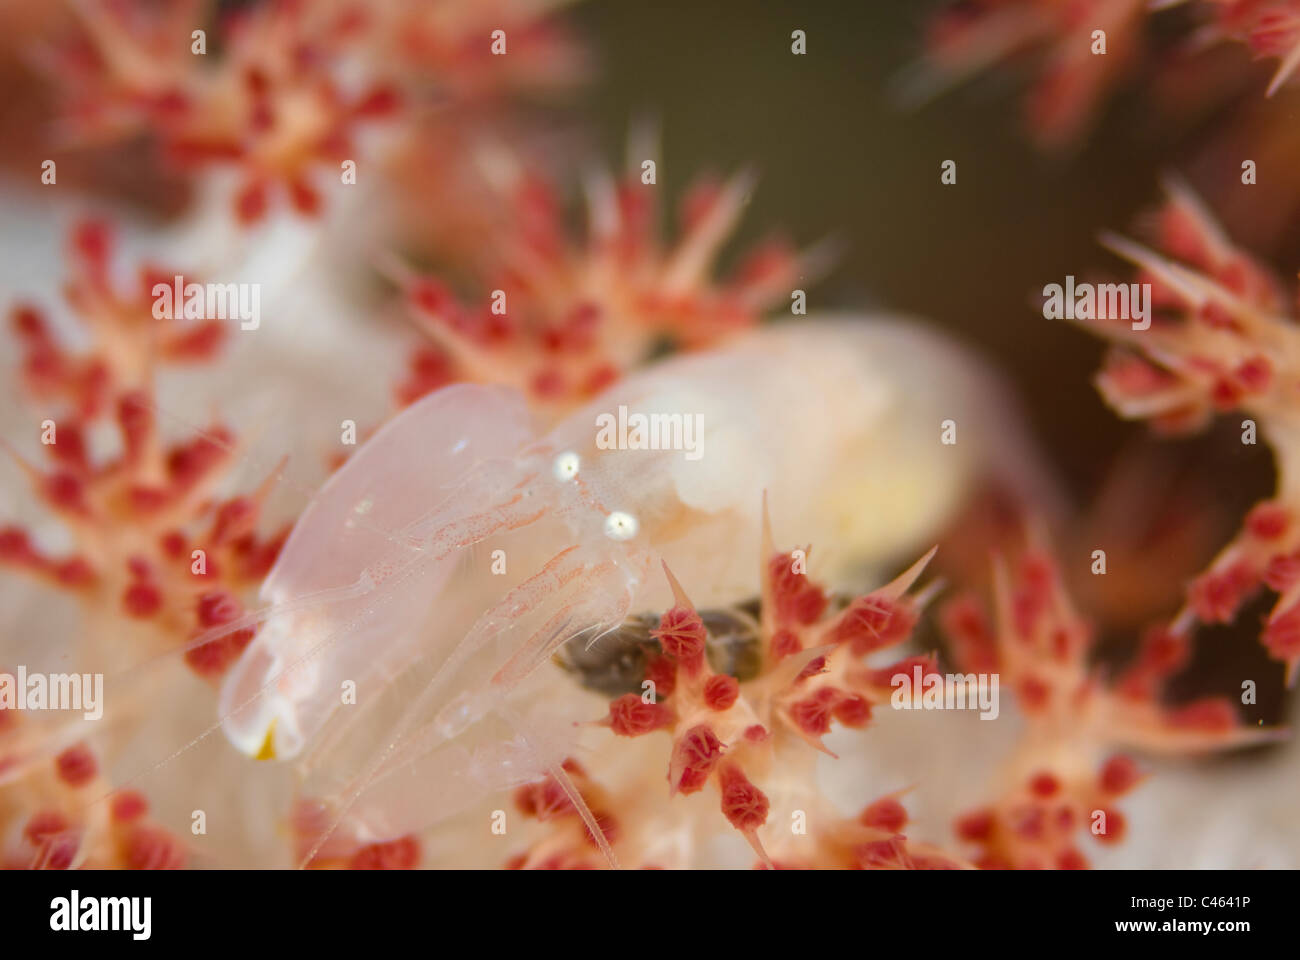 Snapping Shrimp, Alpheus sp, on soft coral, KBR, Lembeh Strait, Sulawesi, Indonesia. Stock Photo